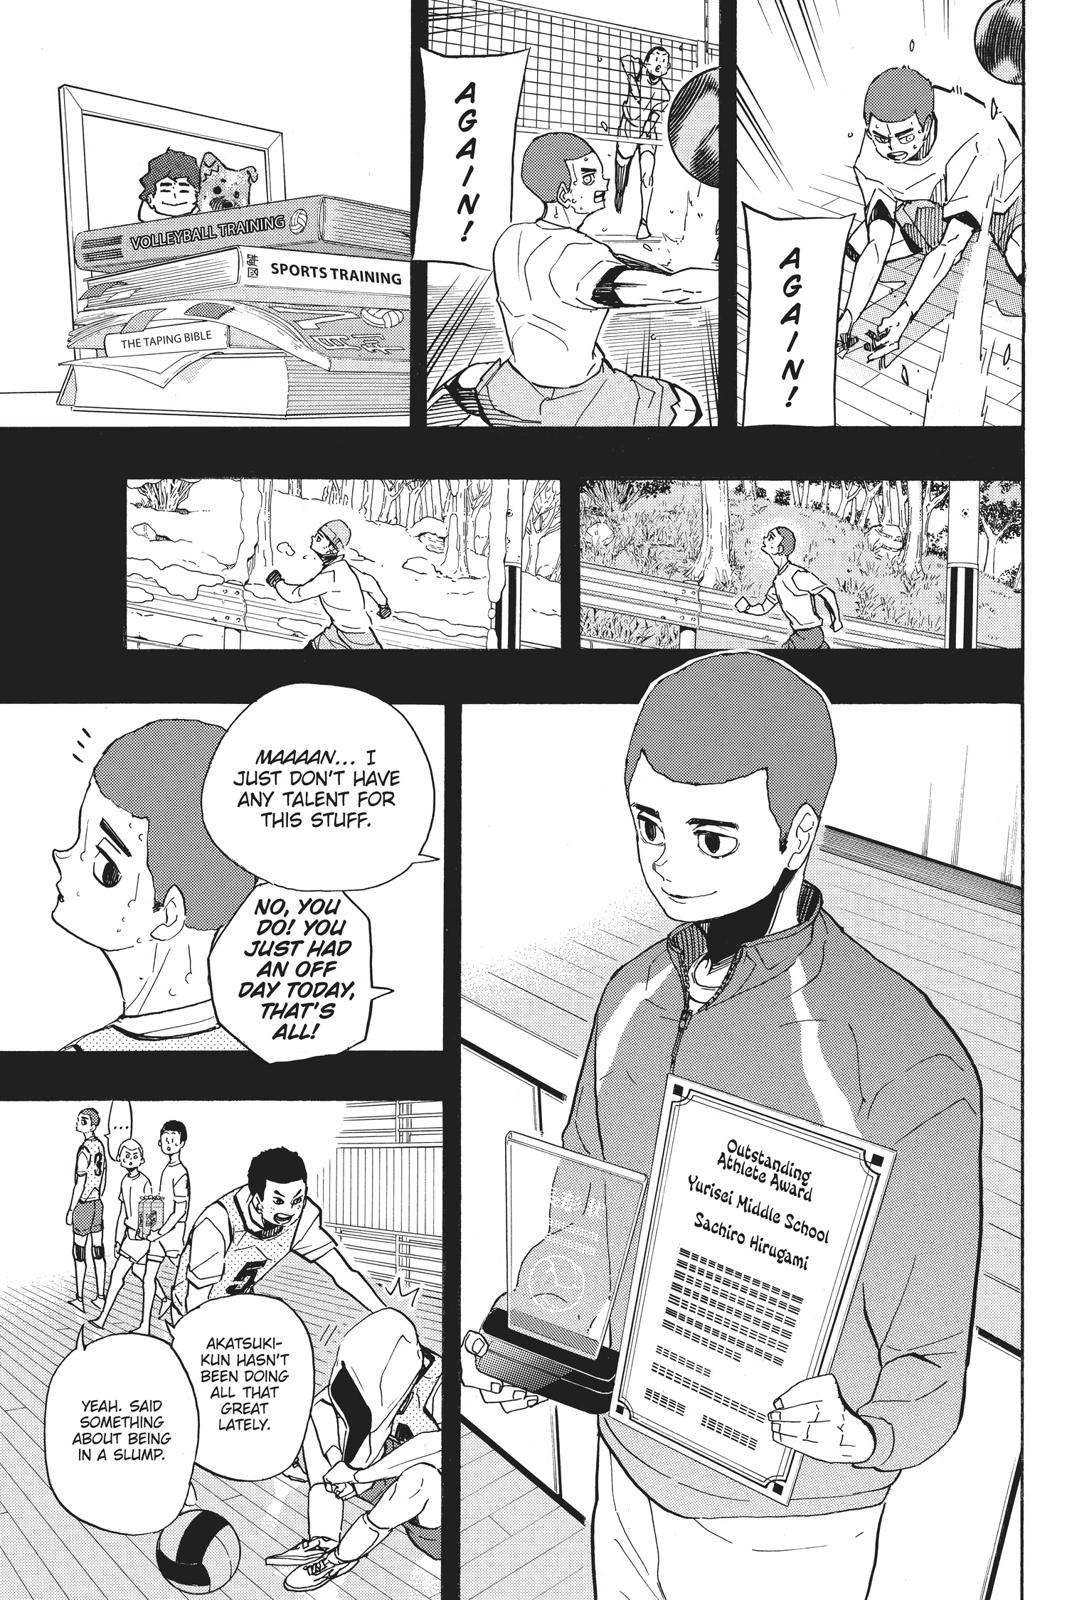  Chapter 351 image 007